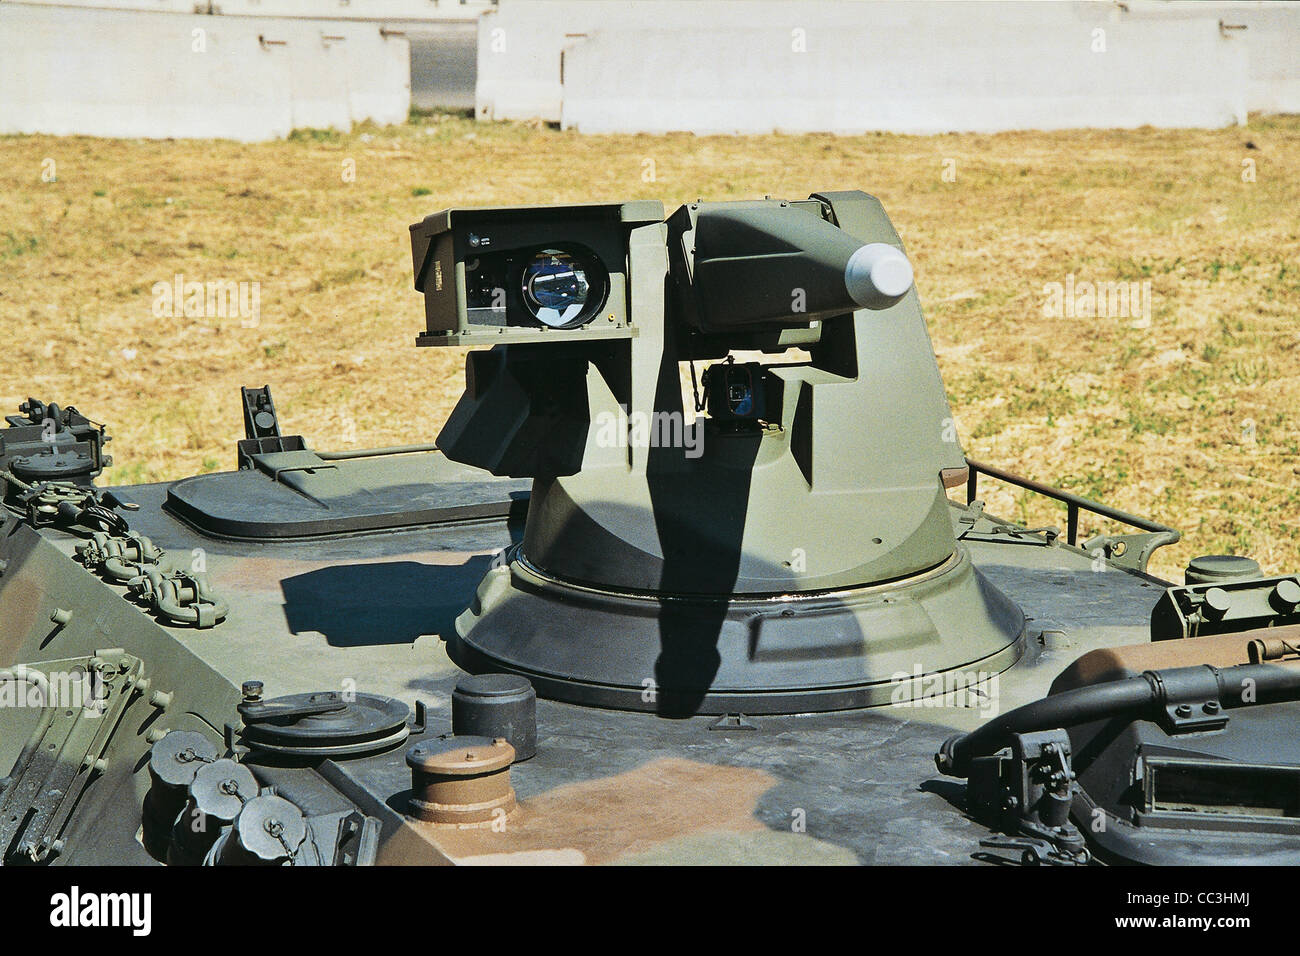 Military Vehicles Armored Century Italy Puma 2002 6X6 Vehicle Series Retail  Remote-Controlled Turret 12.7 Mm Stock Photo - Alamy